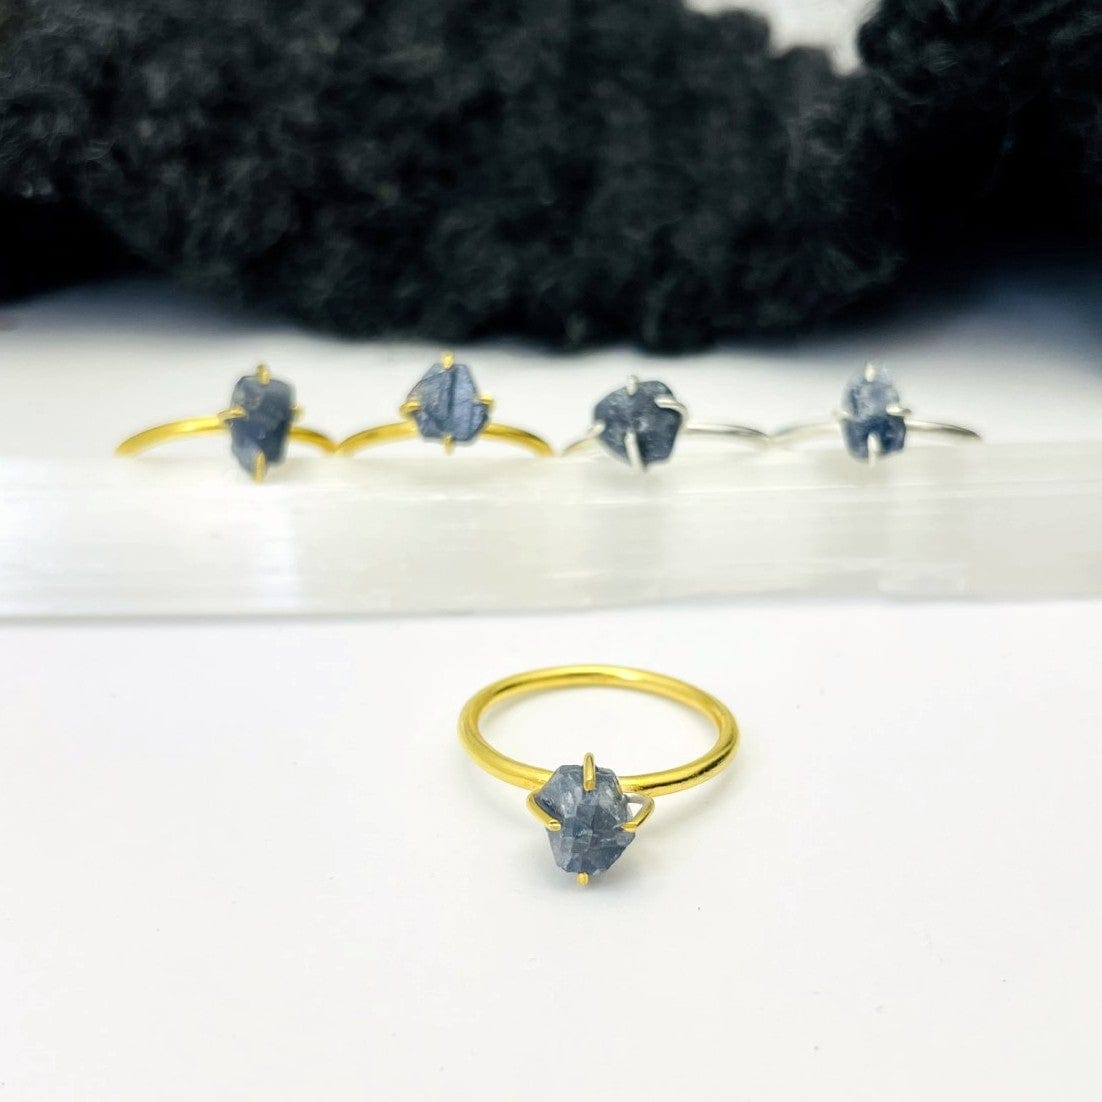 Sapphire Gemstone Rings in Gold and Silver